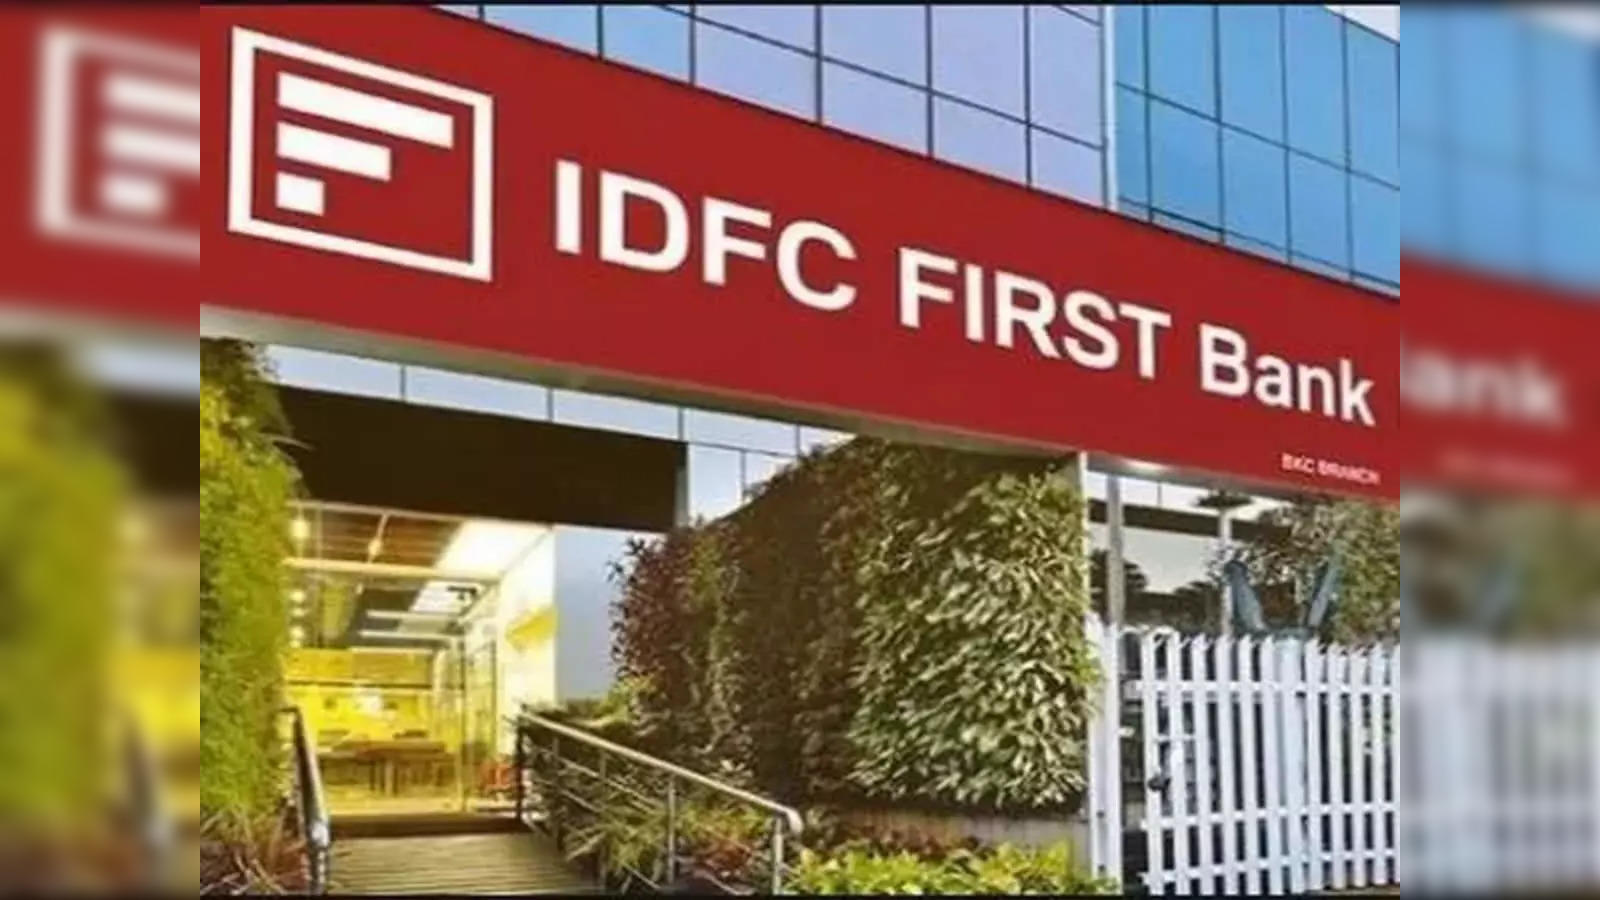 IDFC First Banks in Chandigarh Sector 26,Chandigarh - Best Banks in  Chandigarh - Justdial